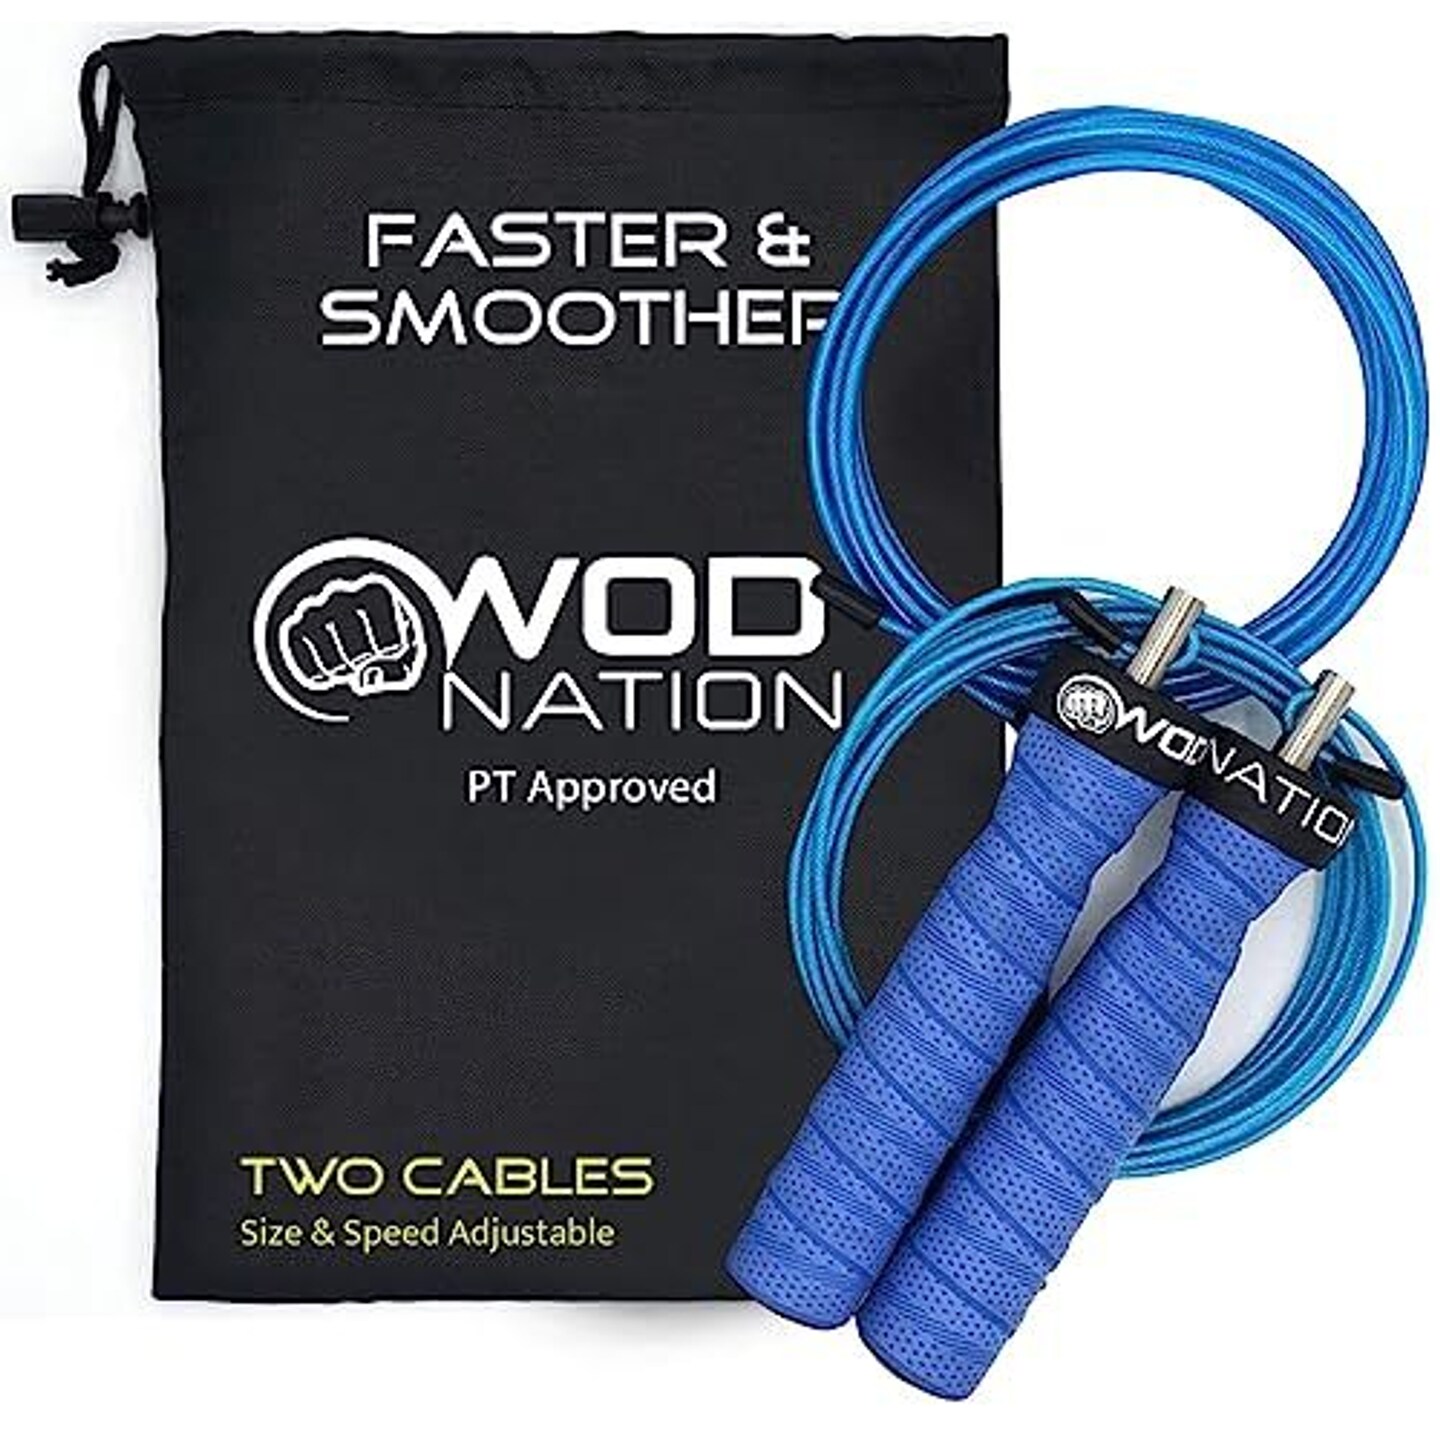 WOD Nation Attack Speed Adjustable Jump Rope : Unique Two Cable Skipping Workout System : One Thick and One Light 11 Foot Jumping Cable : Perfect for Double Unders forHiit : Fits Men and Women, Blue